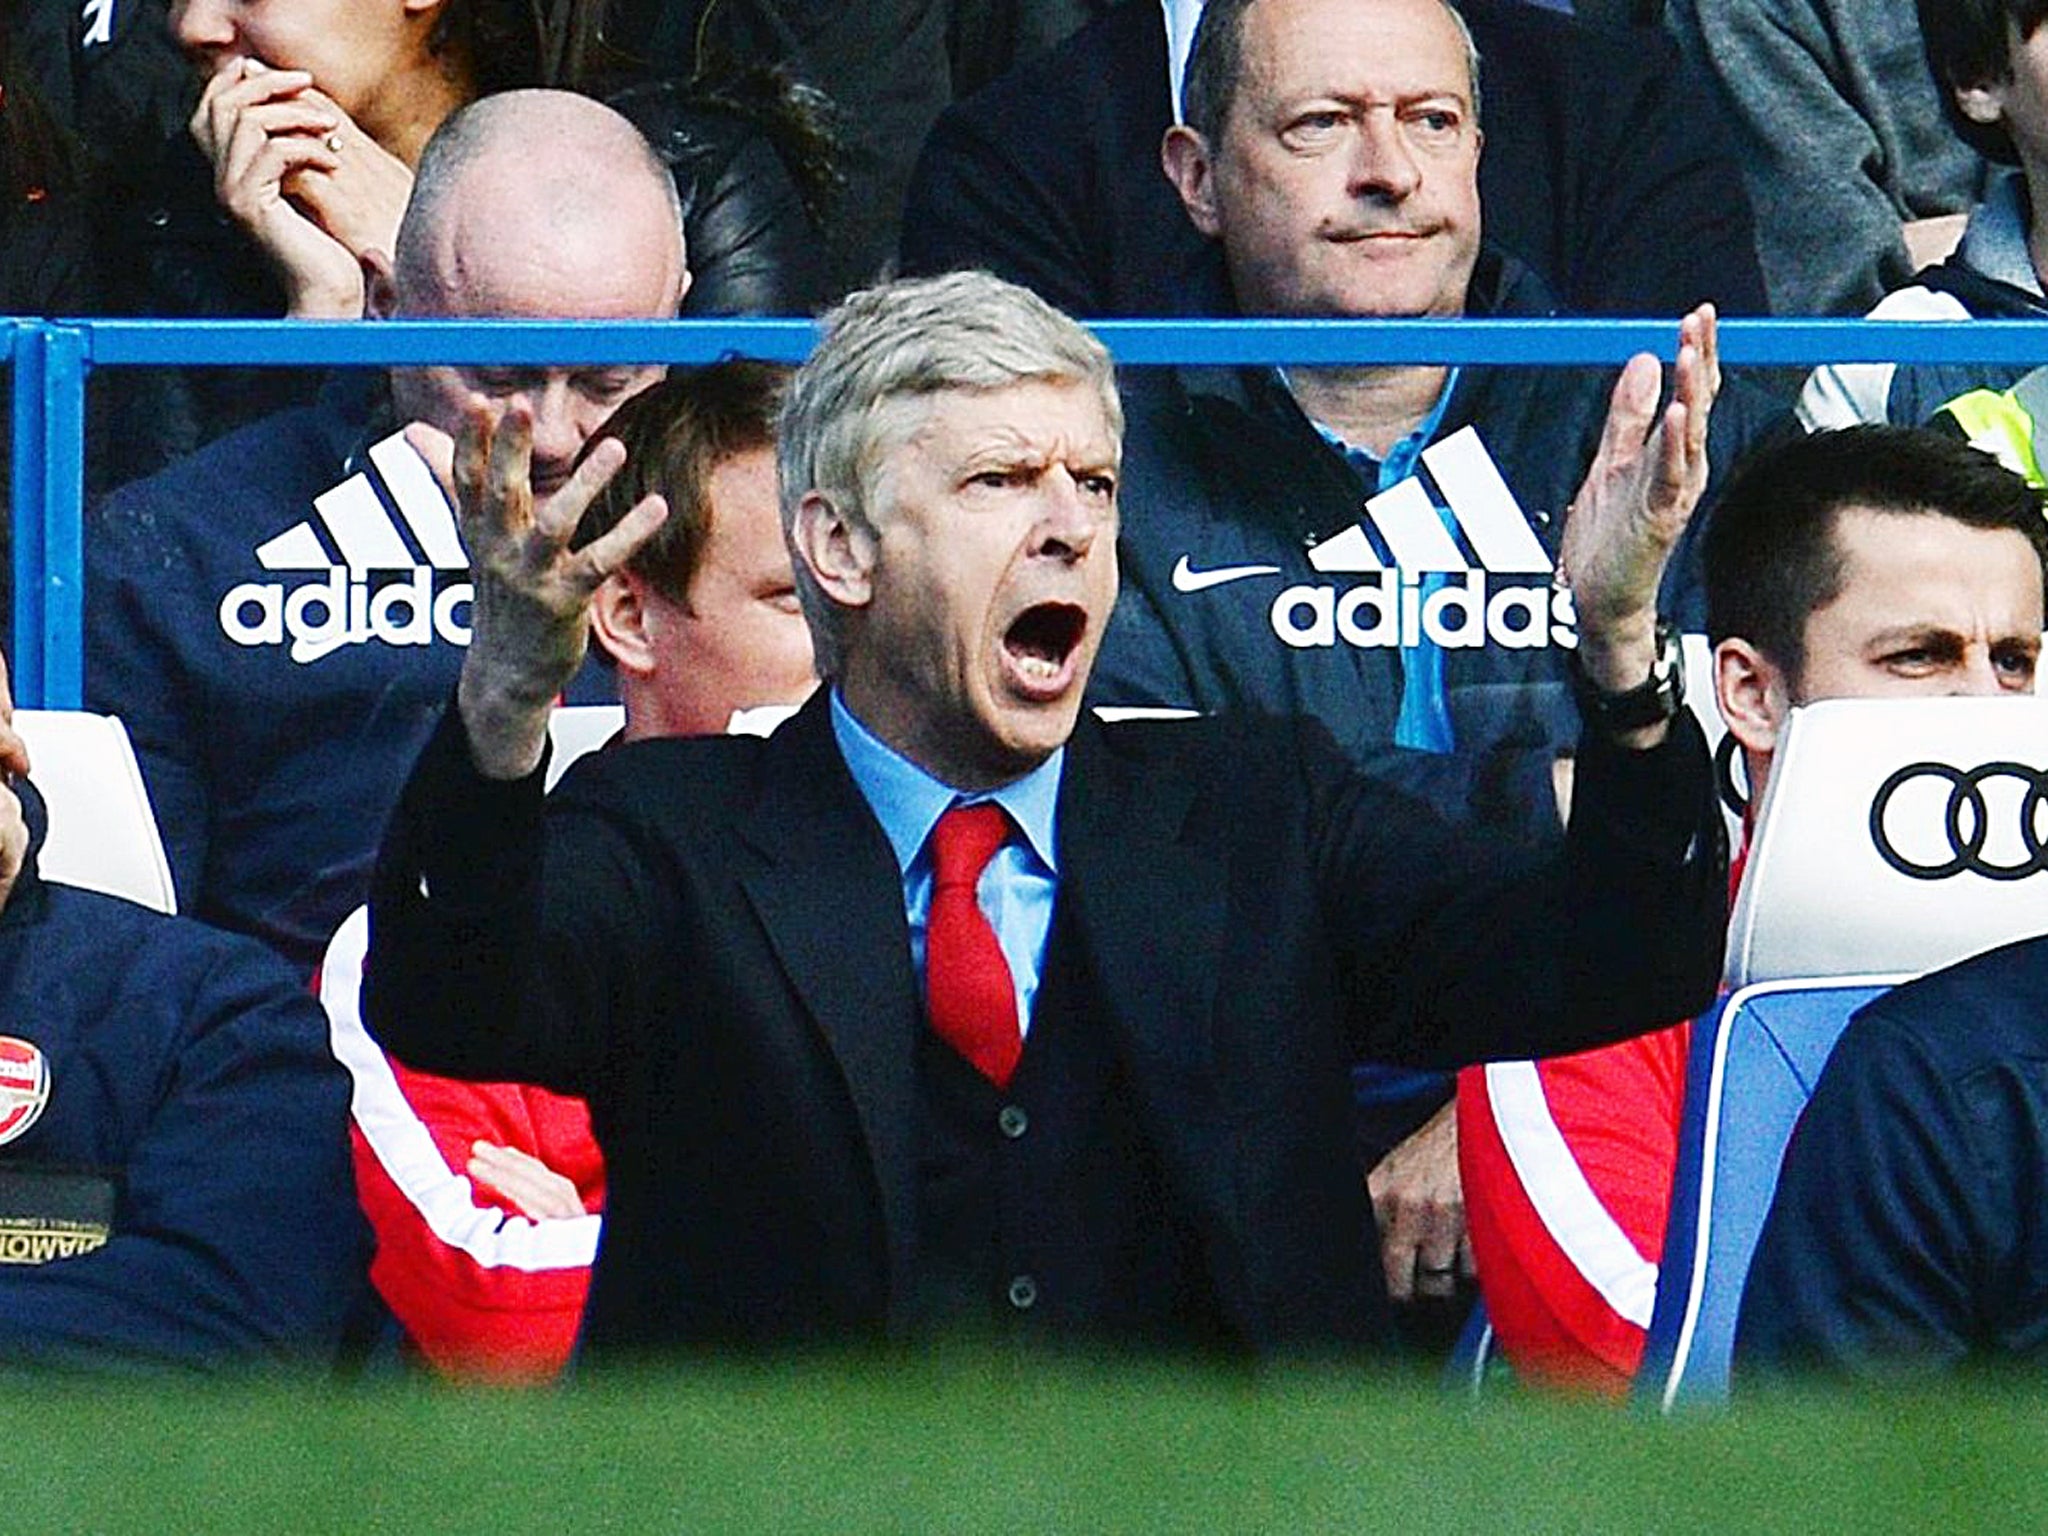 Arsene Wenger gestures from the dugout at Stamford Bridge during Arsenal's 6-0 defeat to Chelsea